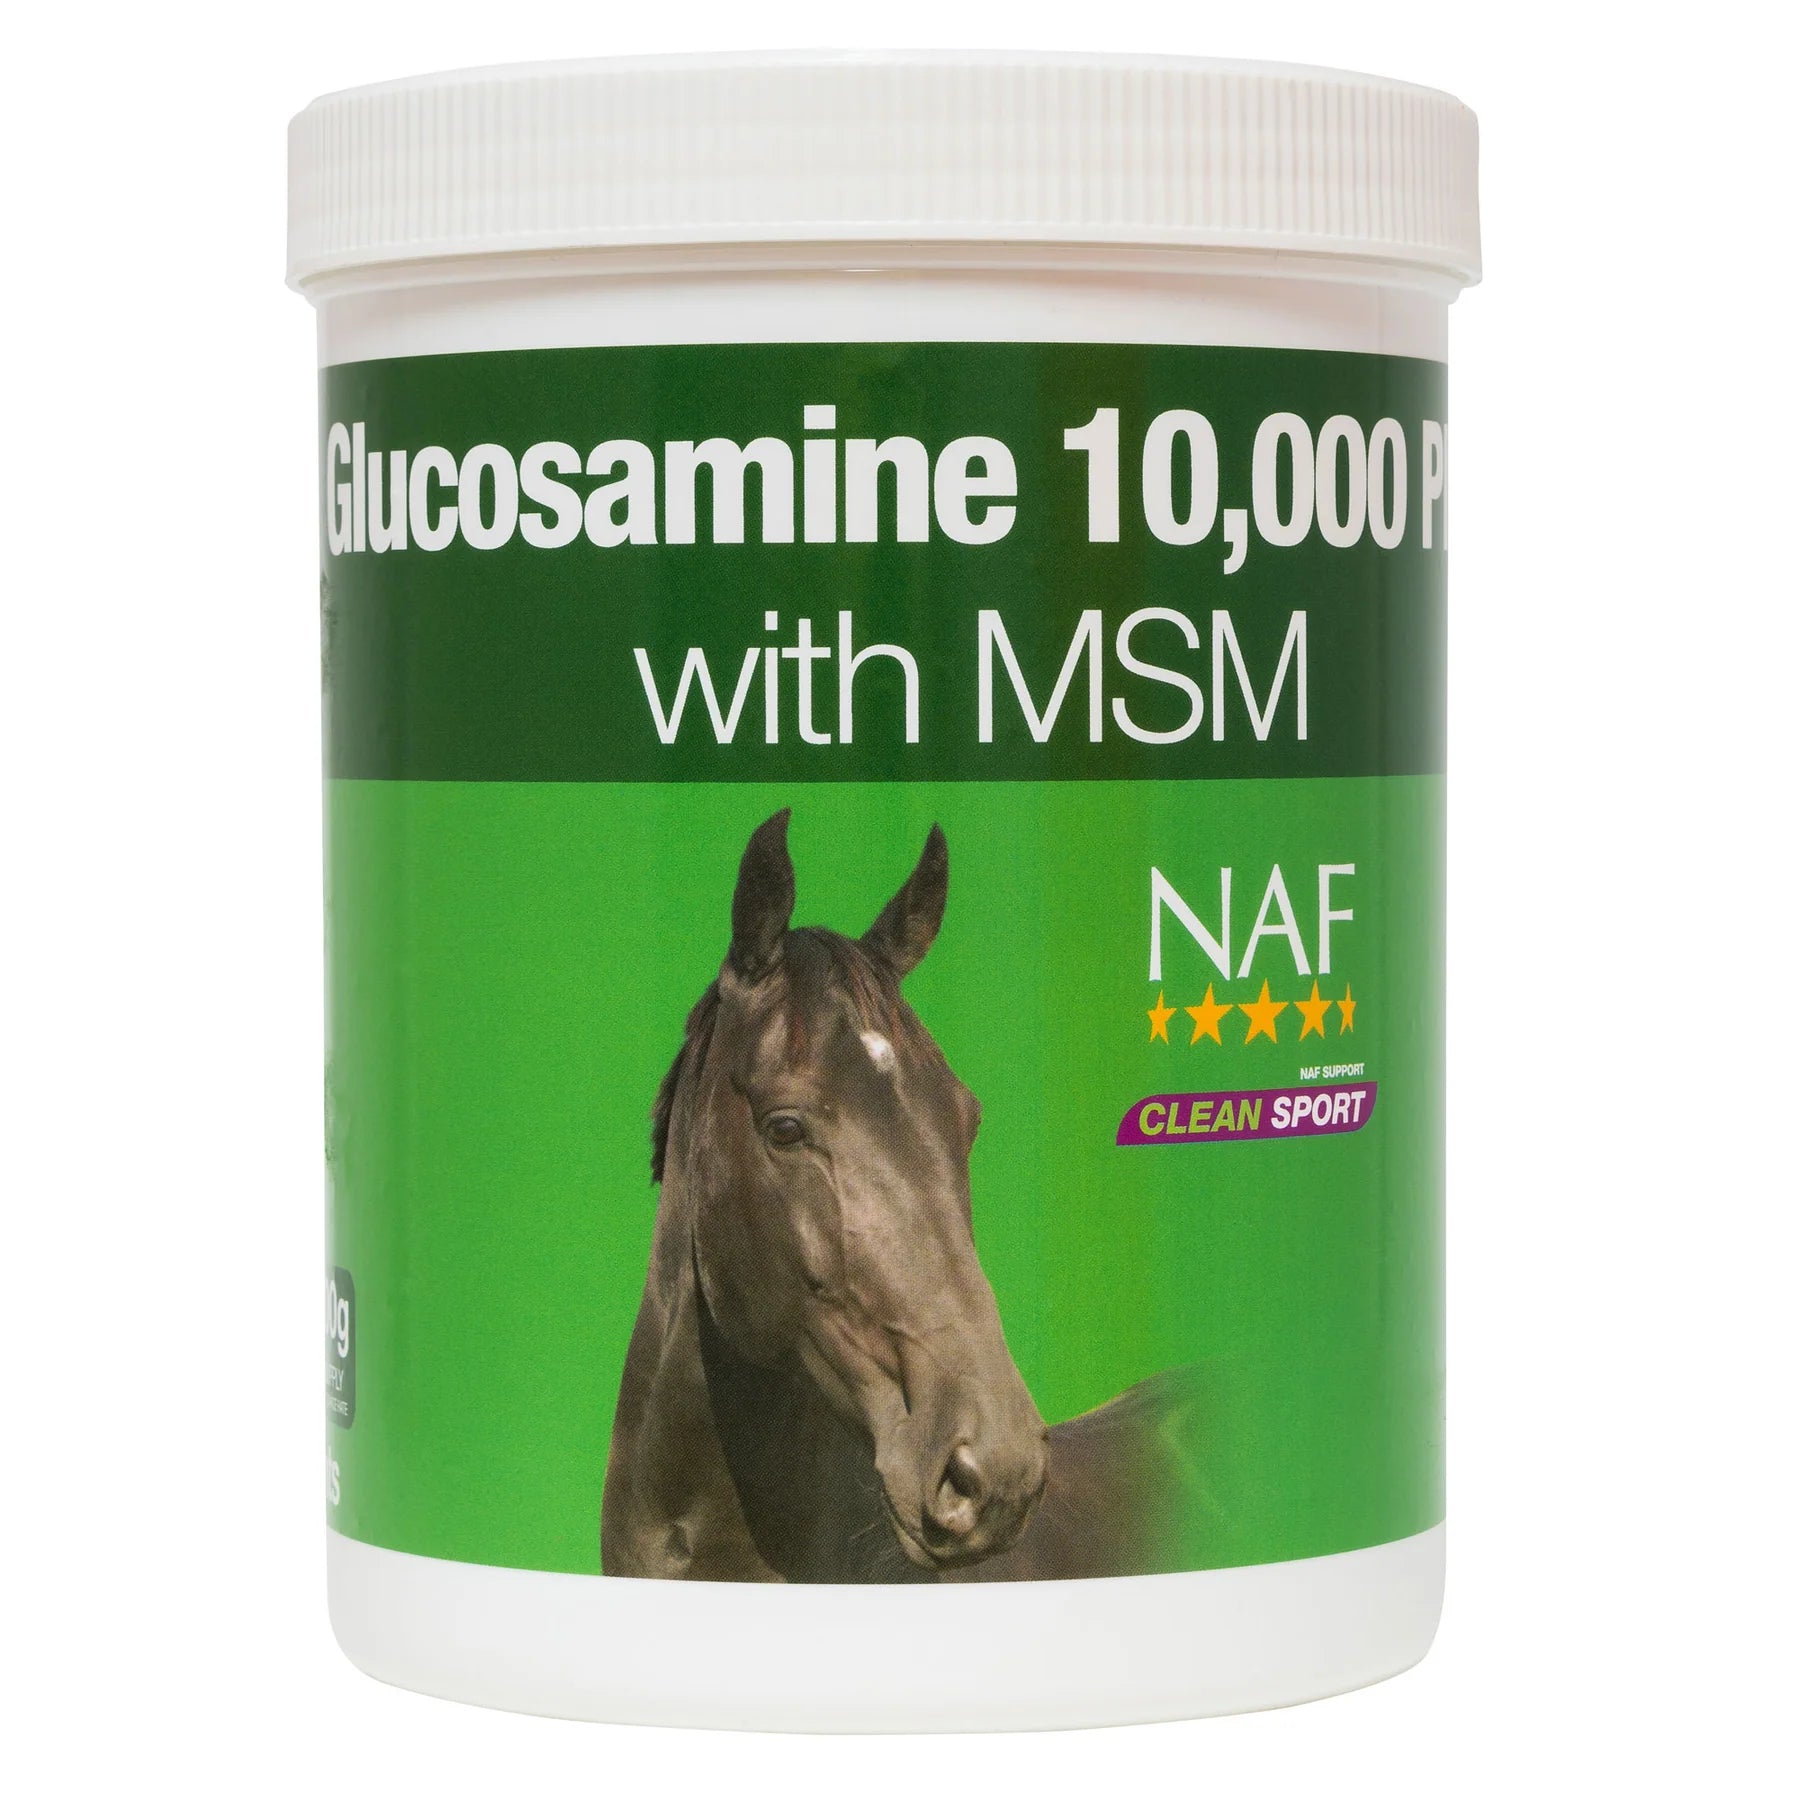 NAF Glucosamine 10,000 Plus with MSM Supplement for Horses and Ponies